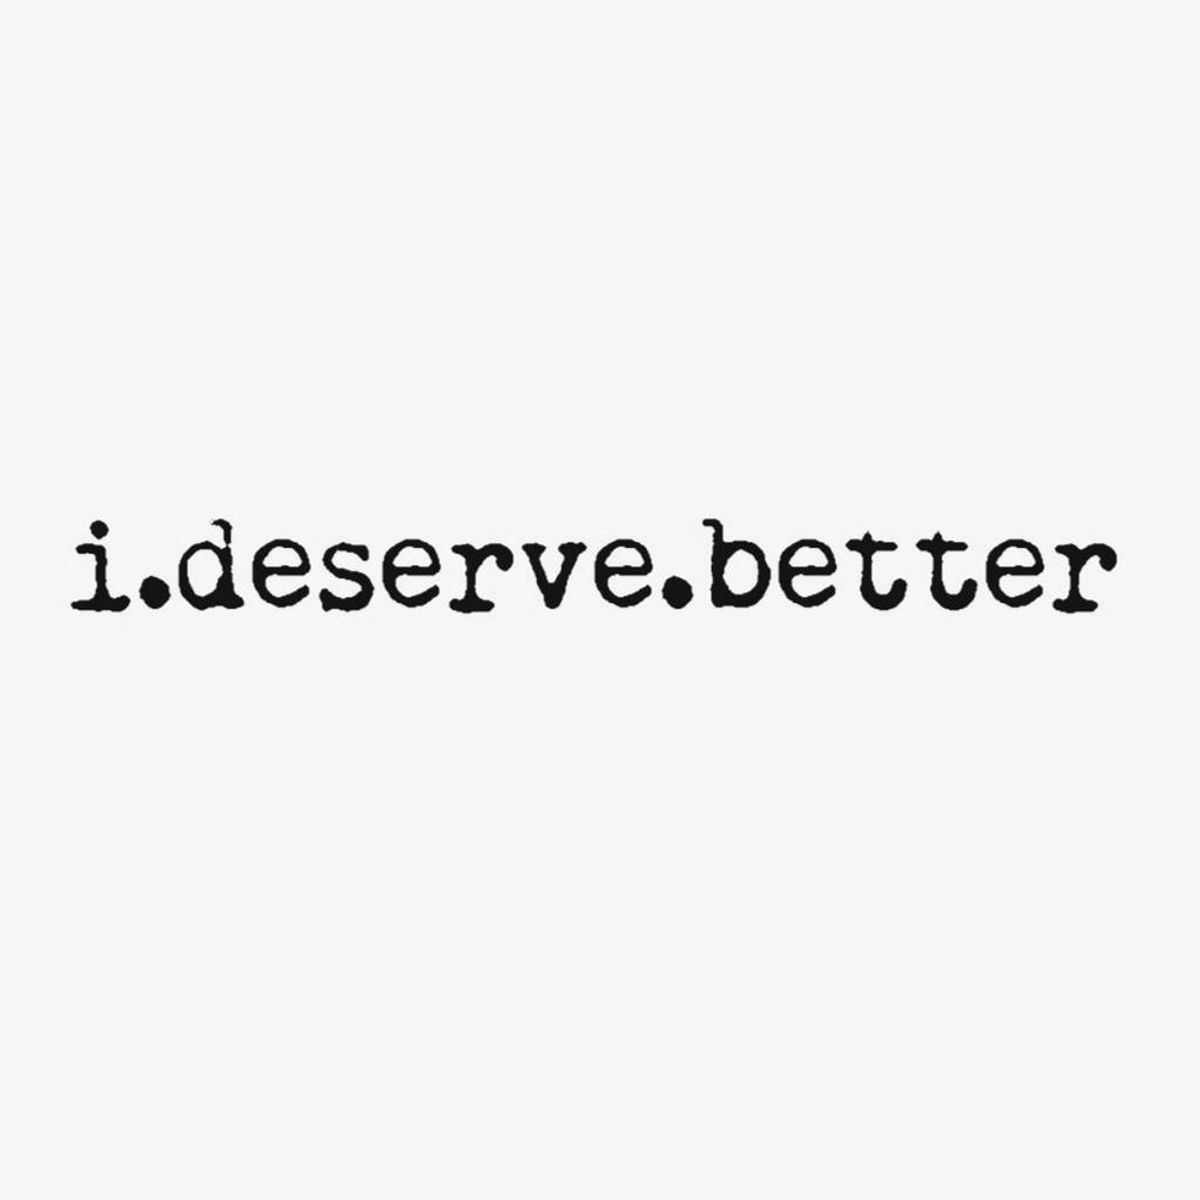 A List Of Things I (And You) Deserve